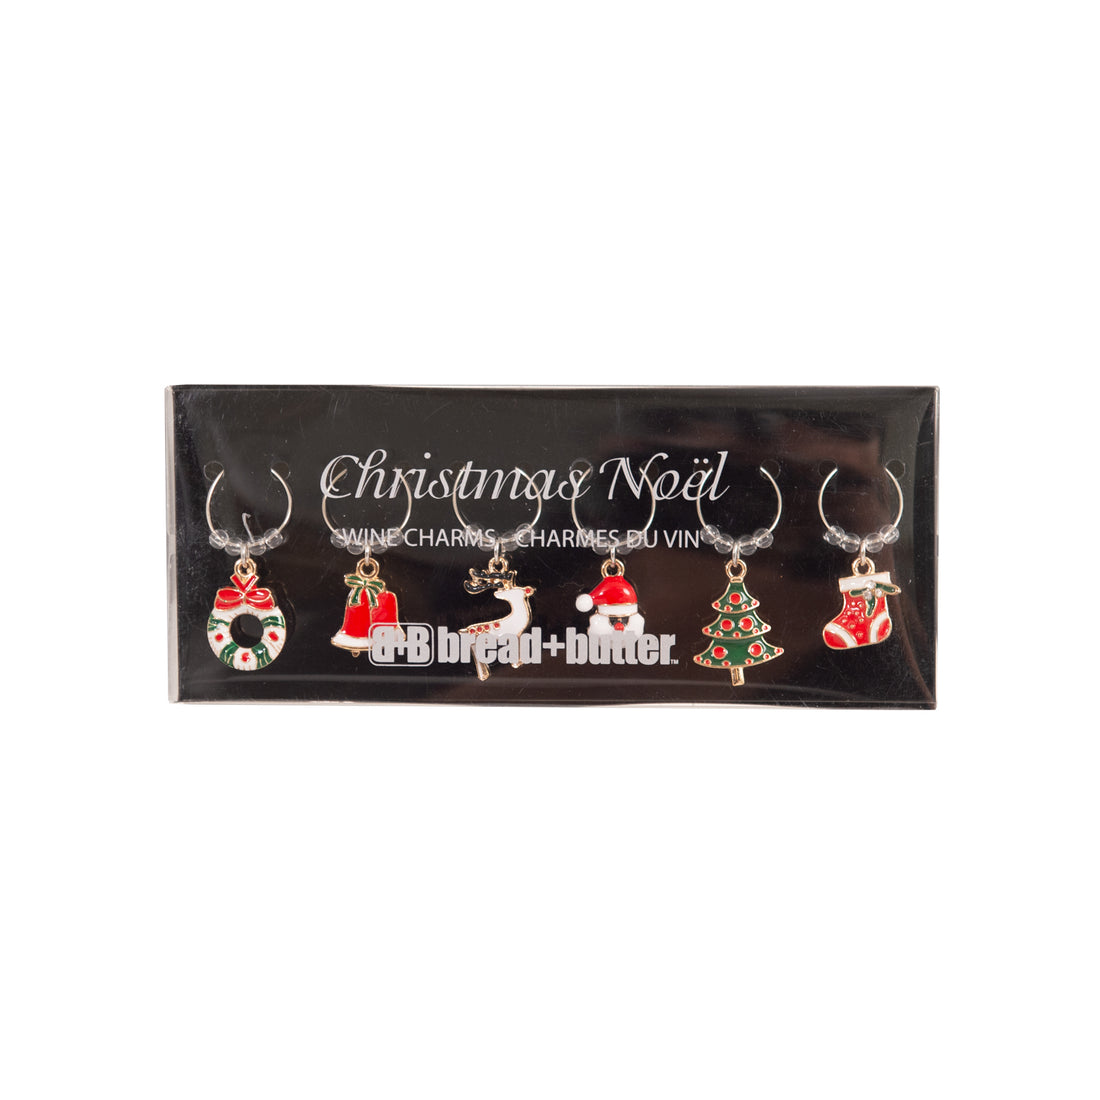 Bread and Butter (6) Various Christmas Mix Wine Glass Charms - 6 Pack-Decorations-PEROZ Accessories